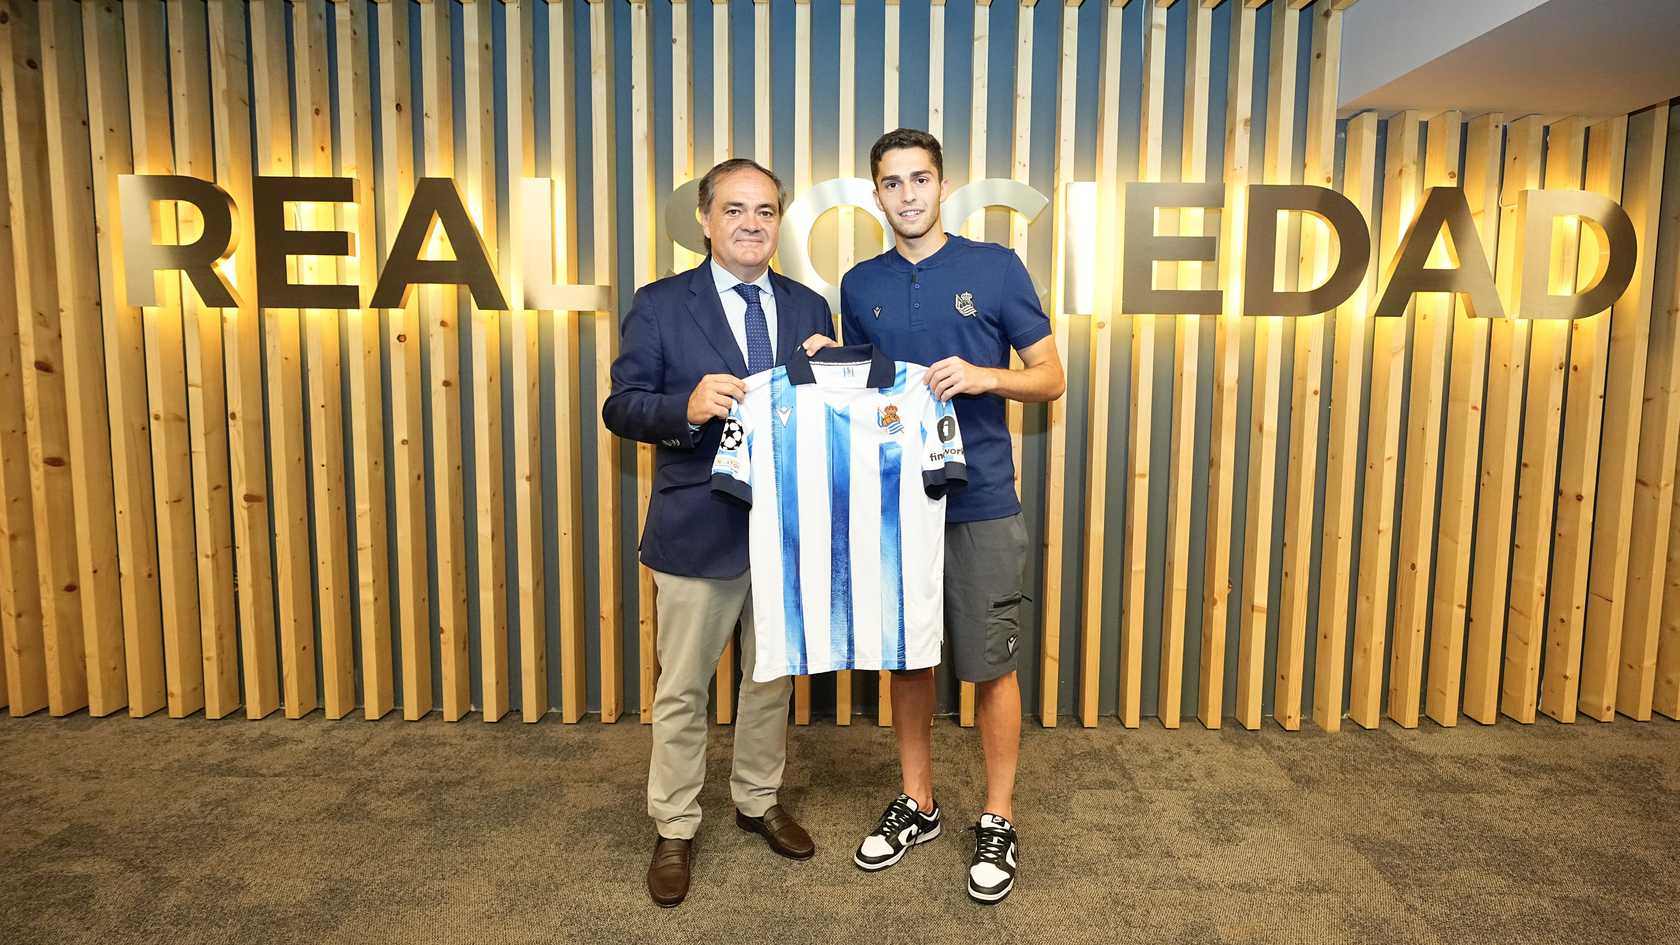 Real Sociedad yet to register new signing with LaLiga, debut this weekend looking increasingly unlikely